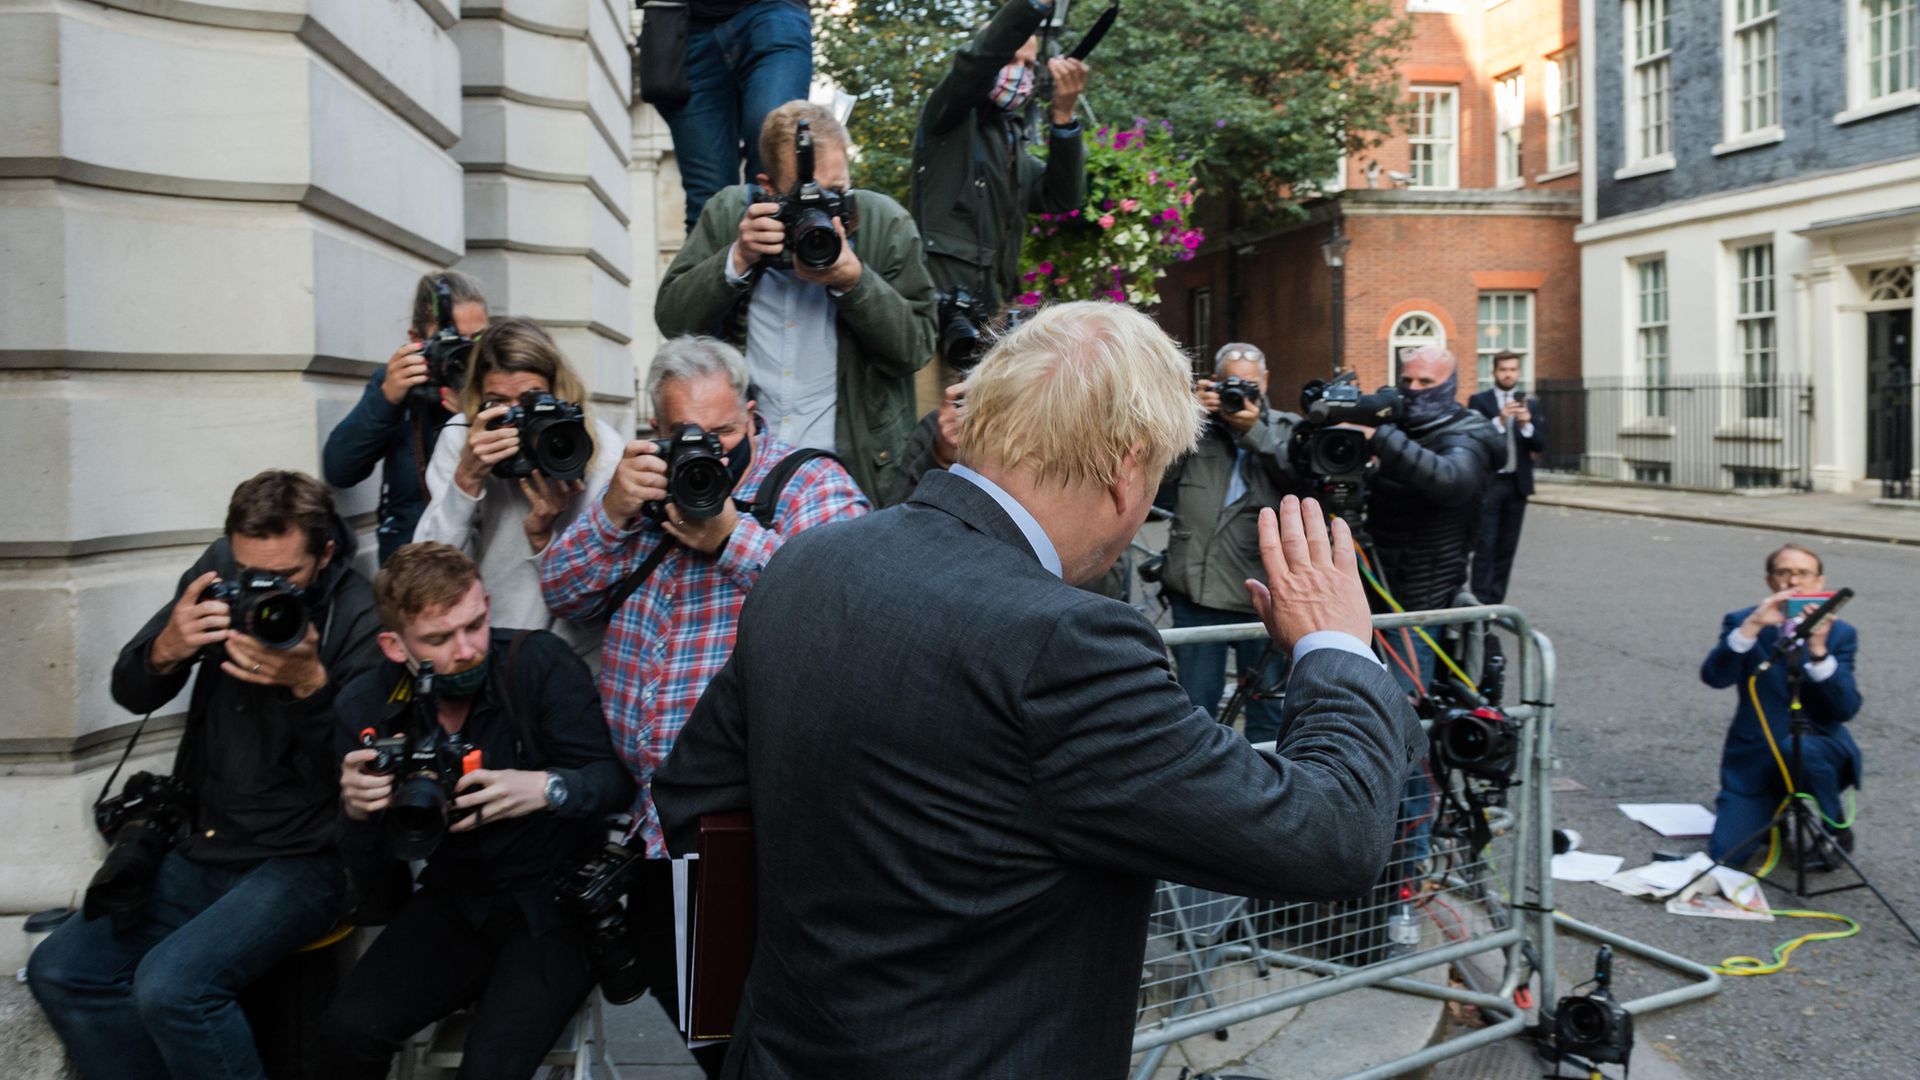 Boris Johnson in Downing Street shortly before announcing new coronavirus restrictions - Credit: NurPhoto via Getty Images